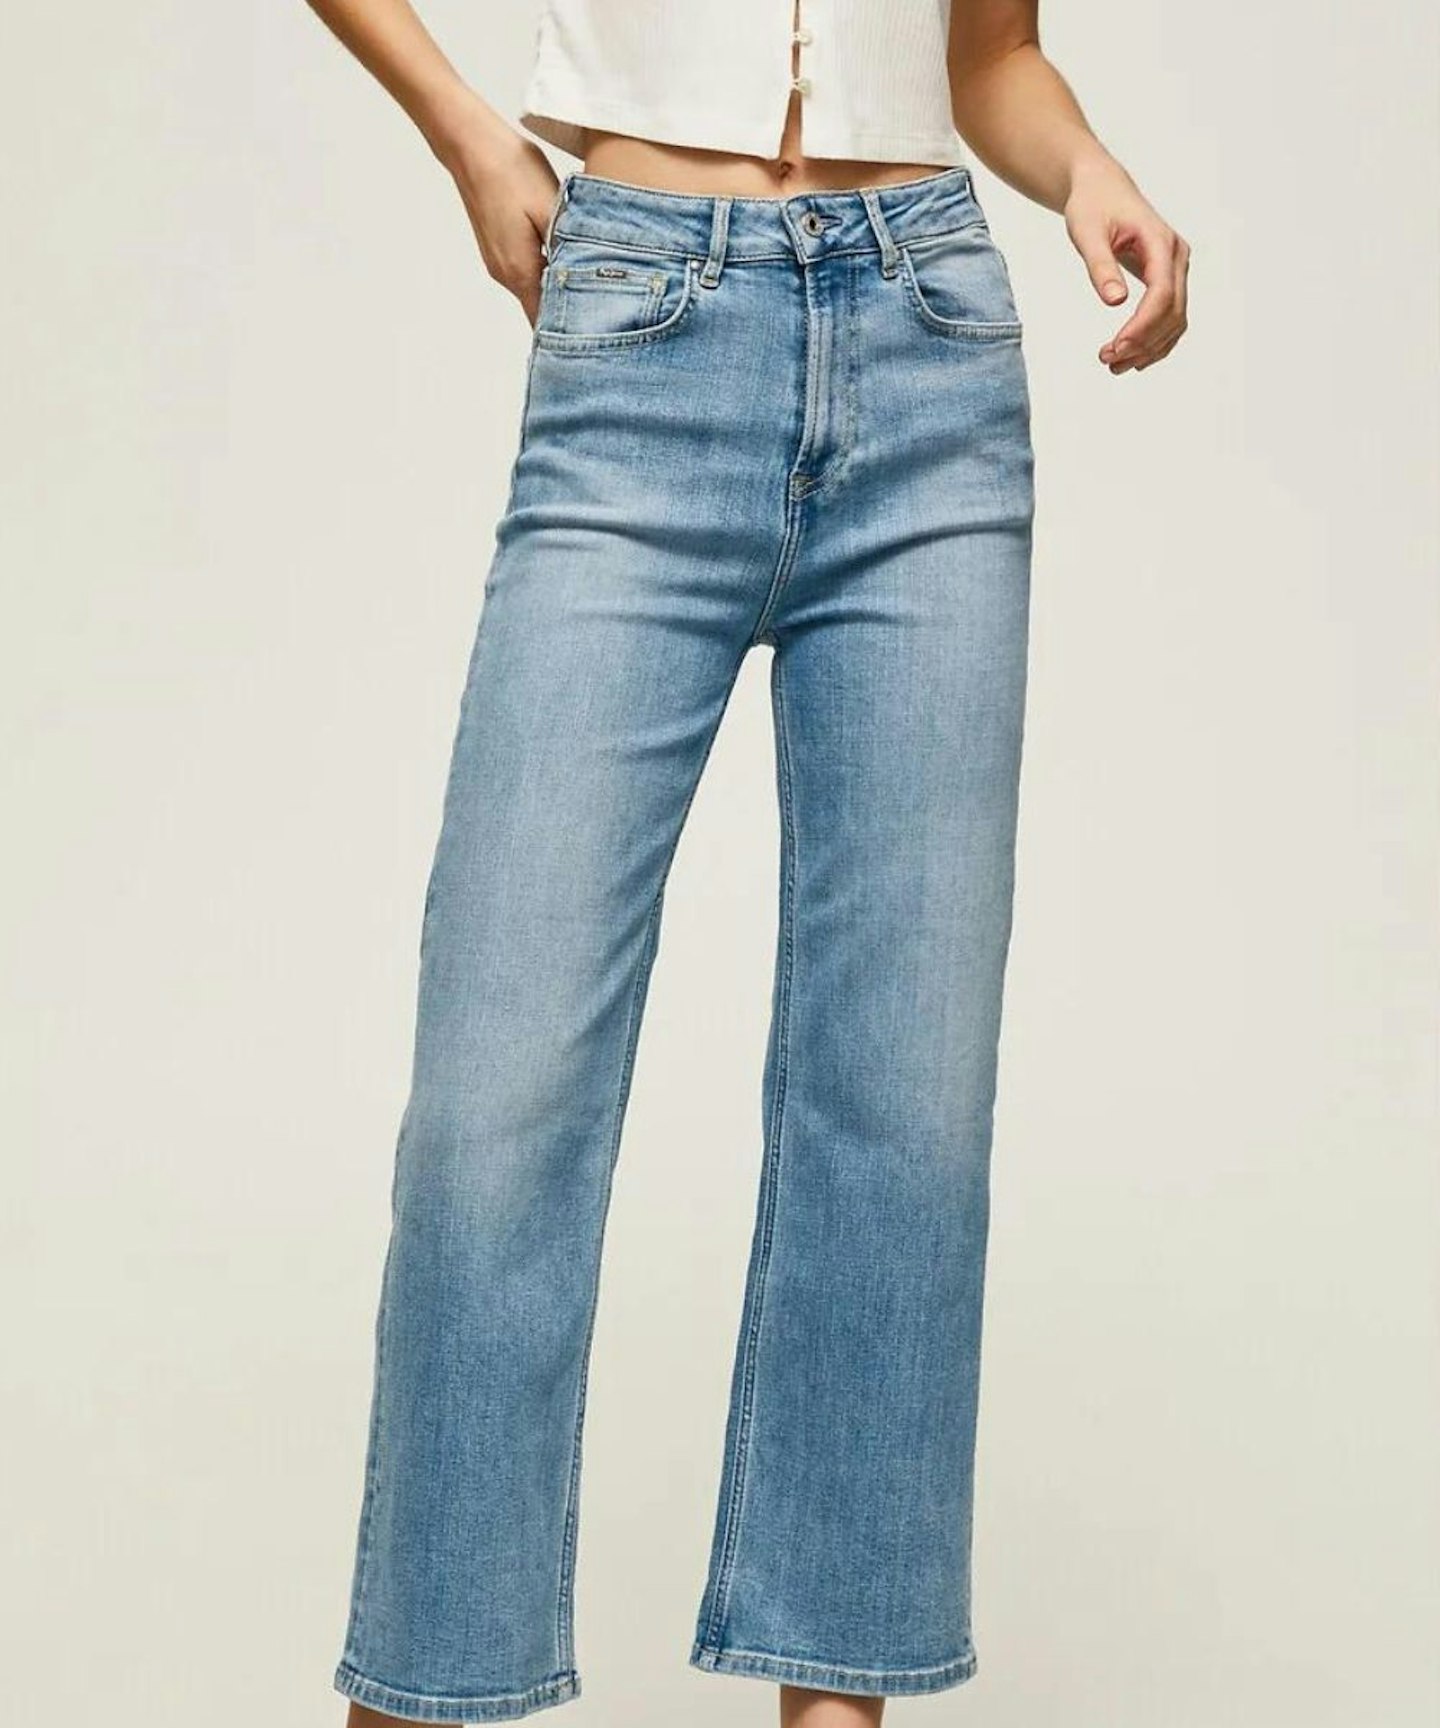 Pepe Jeans, Lexa Sky High Jeans with Wide Leg